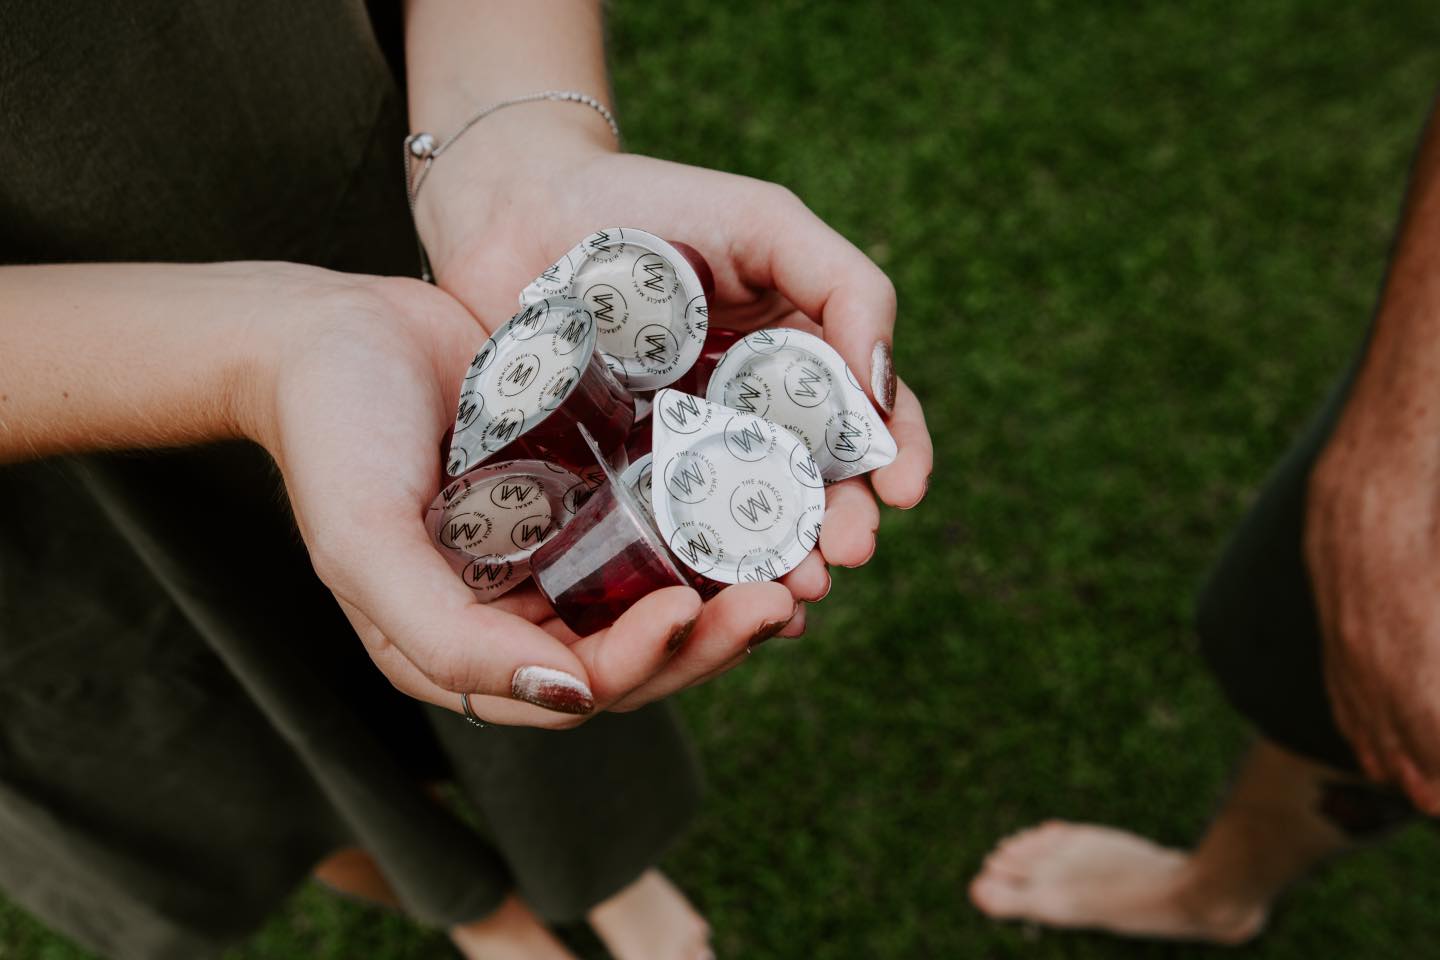 individual communion cups